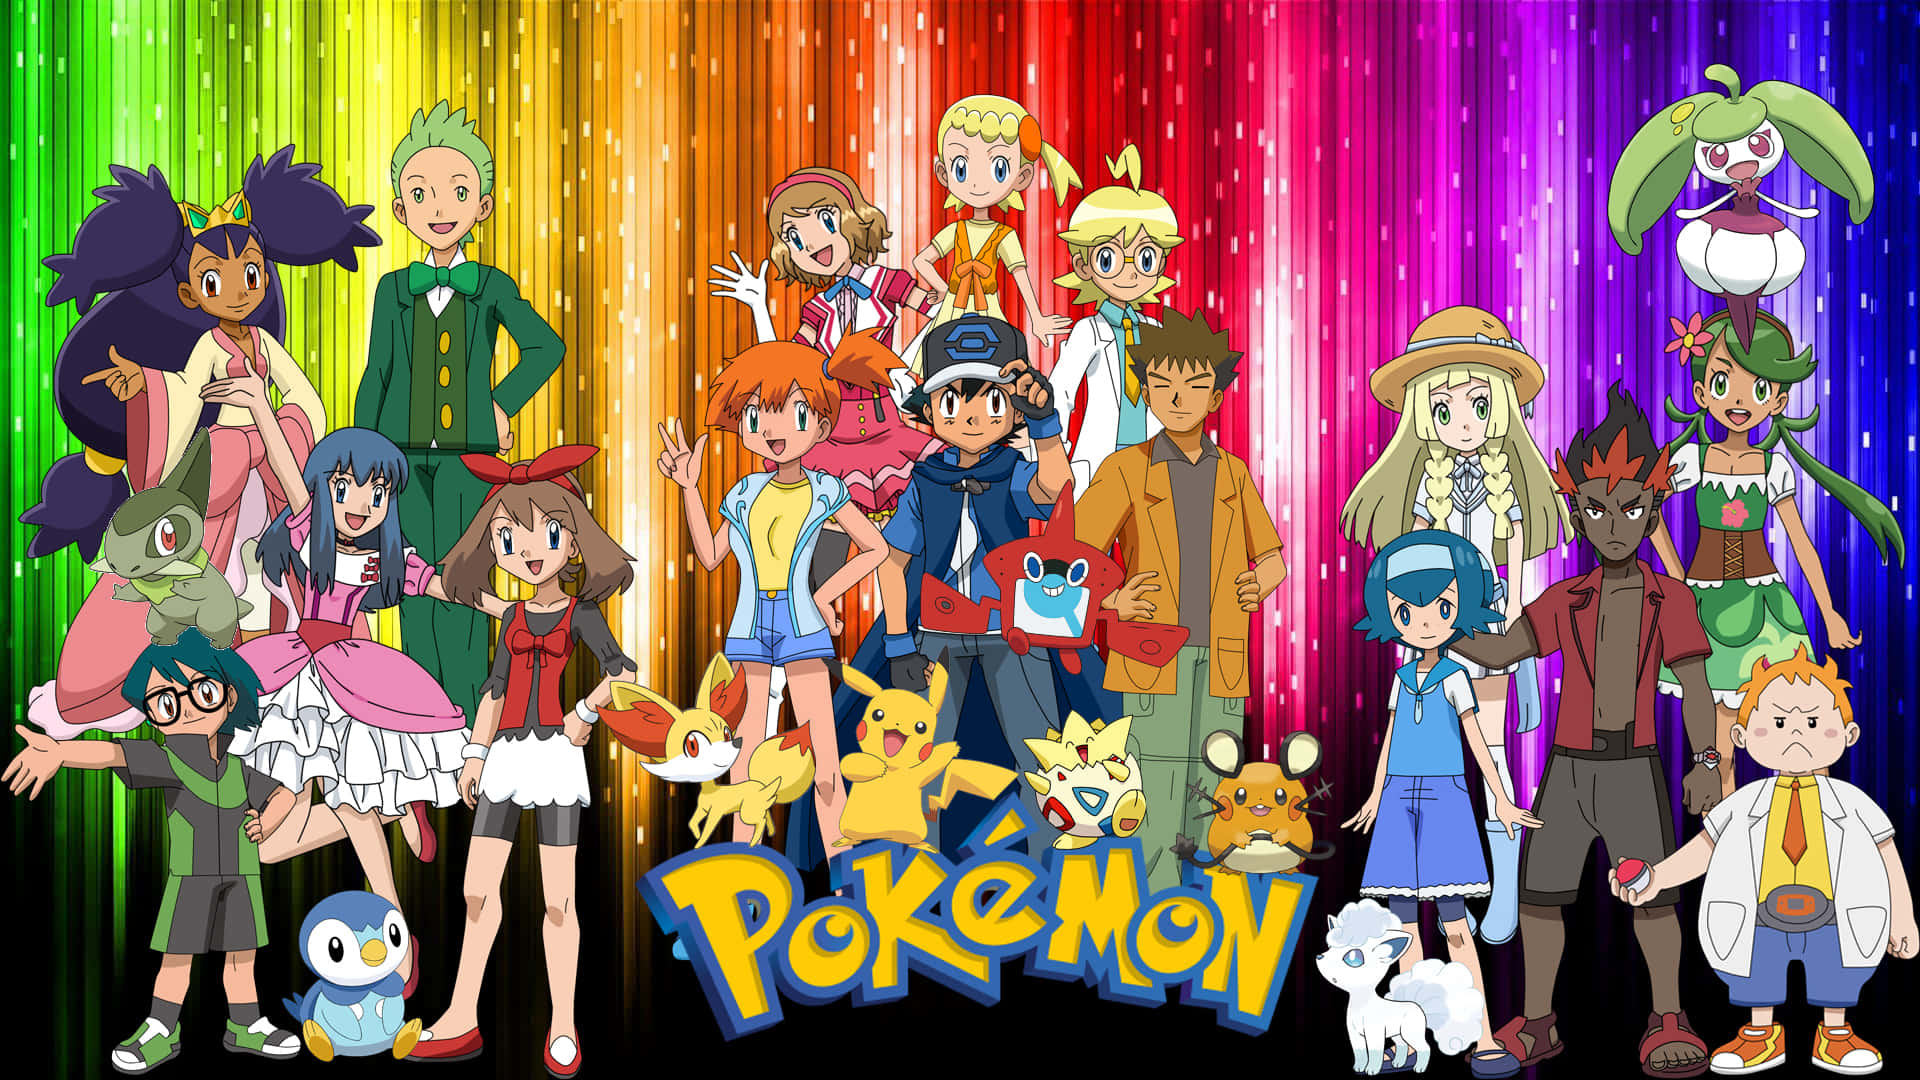 Exciting Pokémon Adventure Awaits - Featuring Ash, Pikachu, and Friends Wallpaper